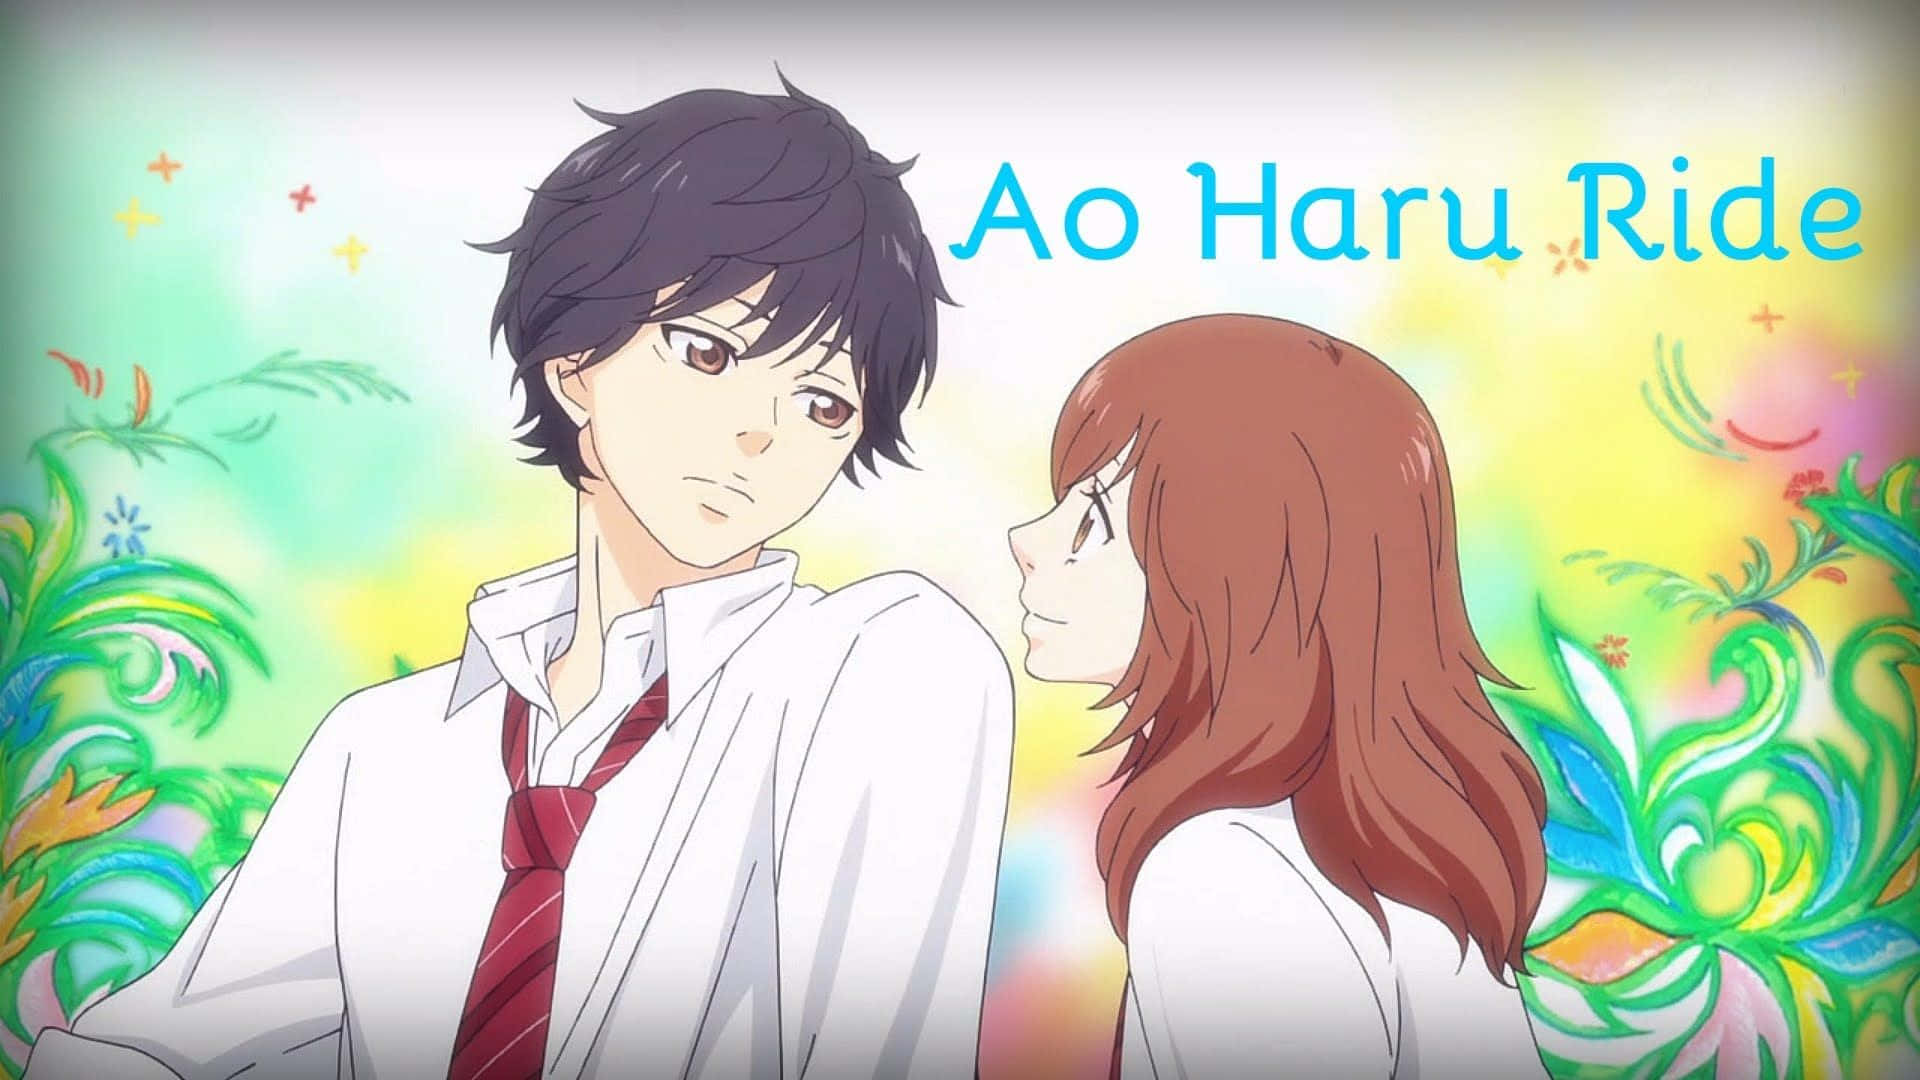 Kou starts his roller-coaster ride of love and friendship in Ao Haru Ride